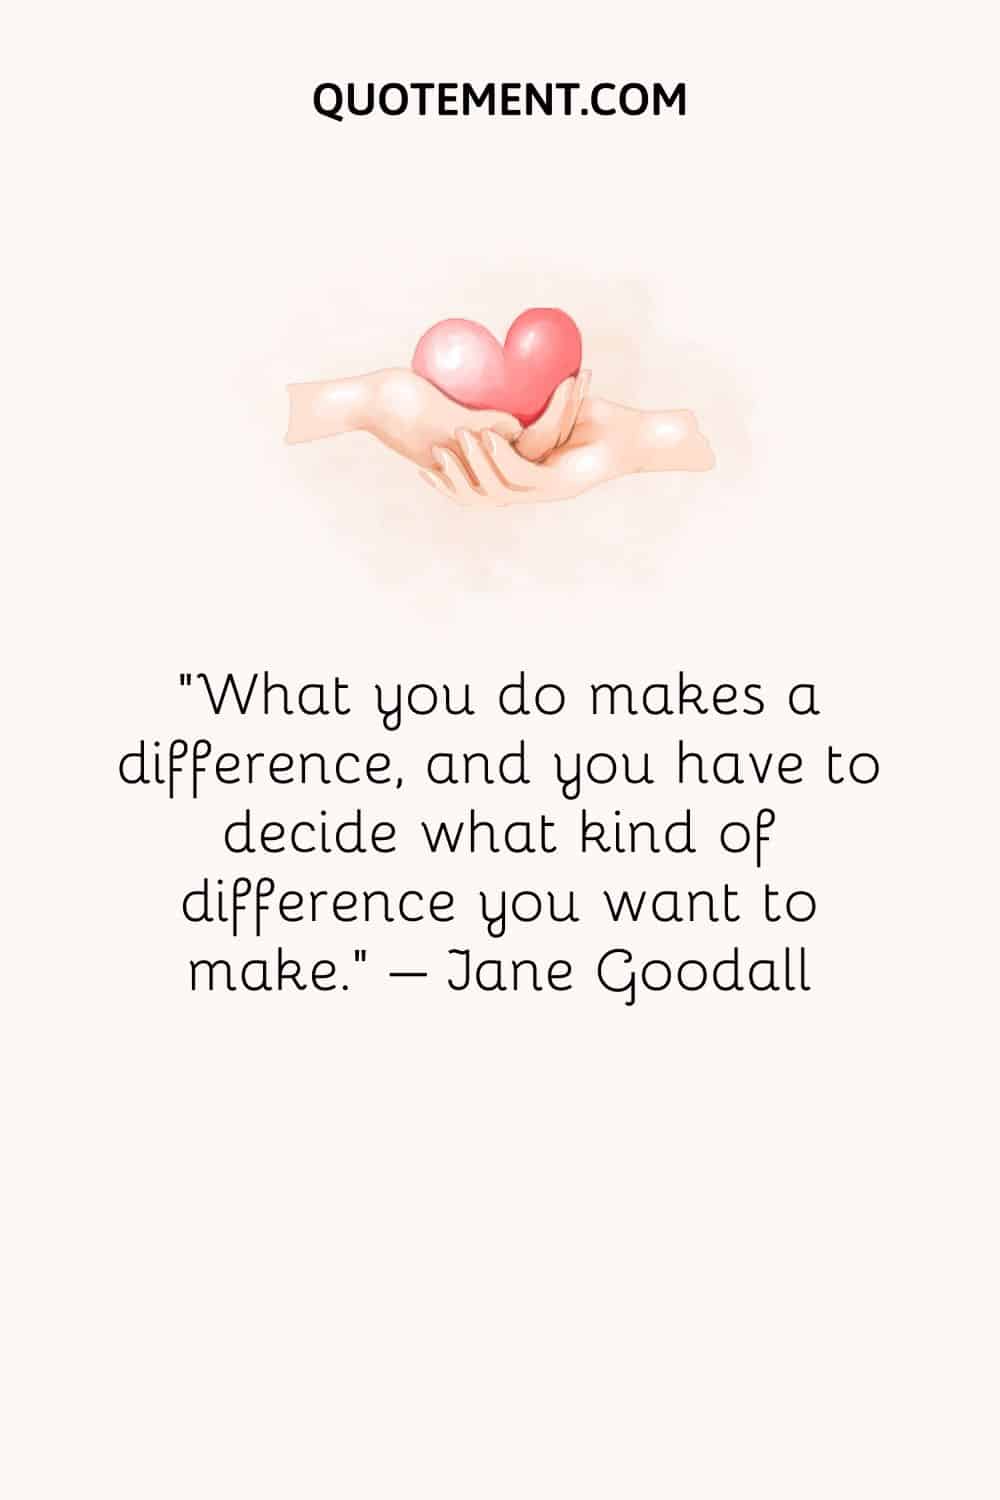 What you do makes a difference, and you have to decide what kind of difference you want to make 1